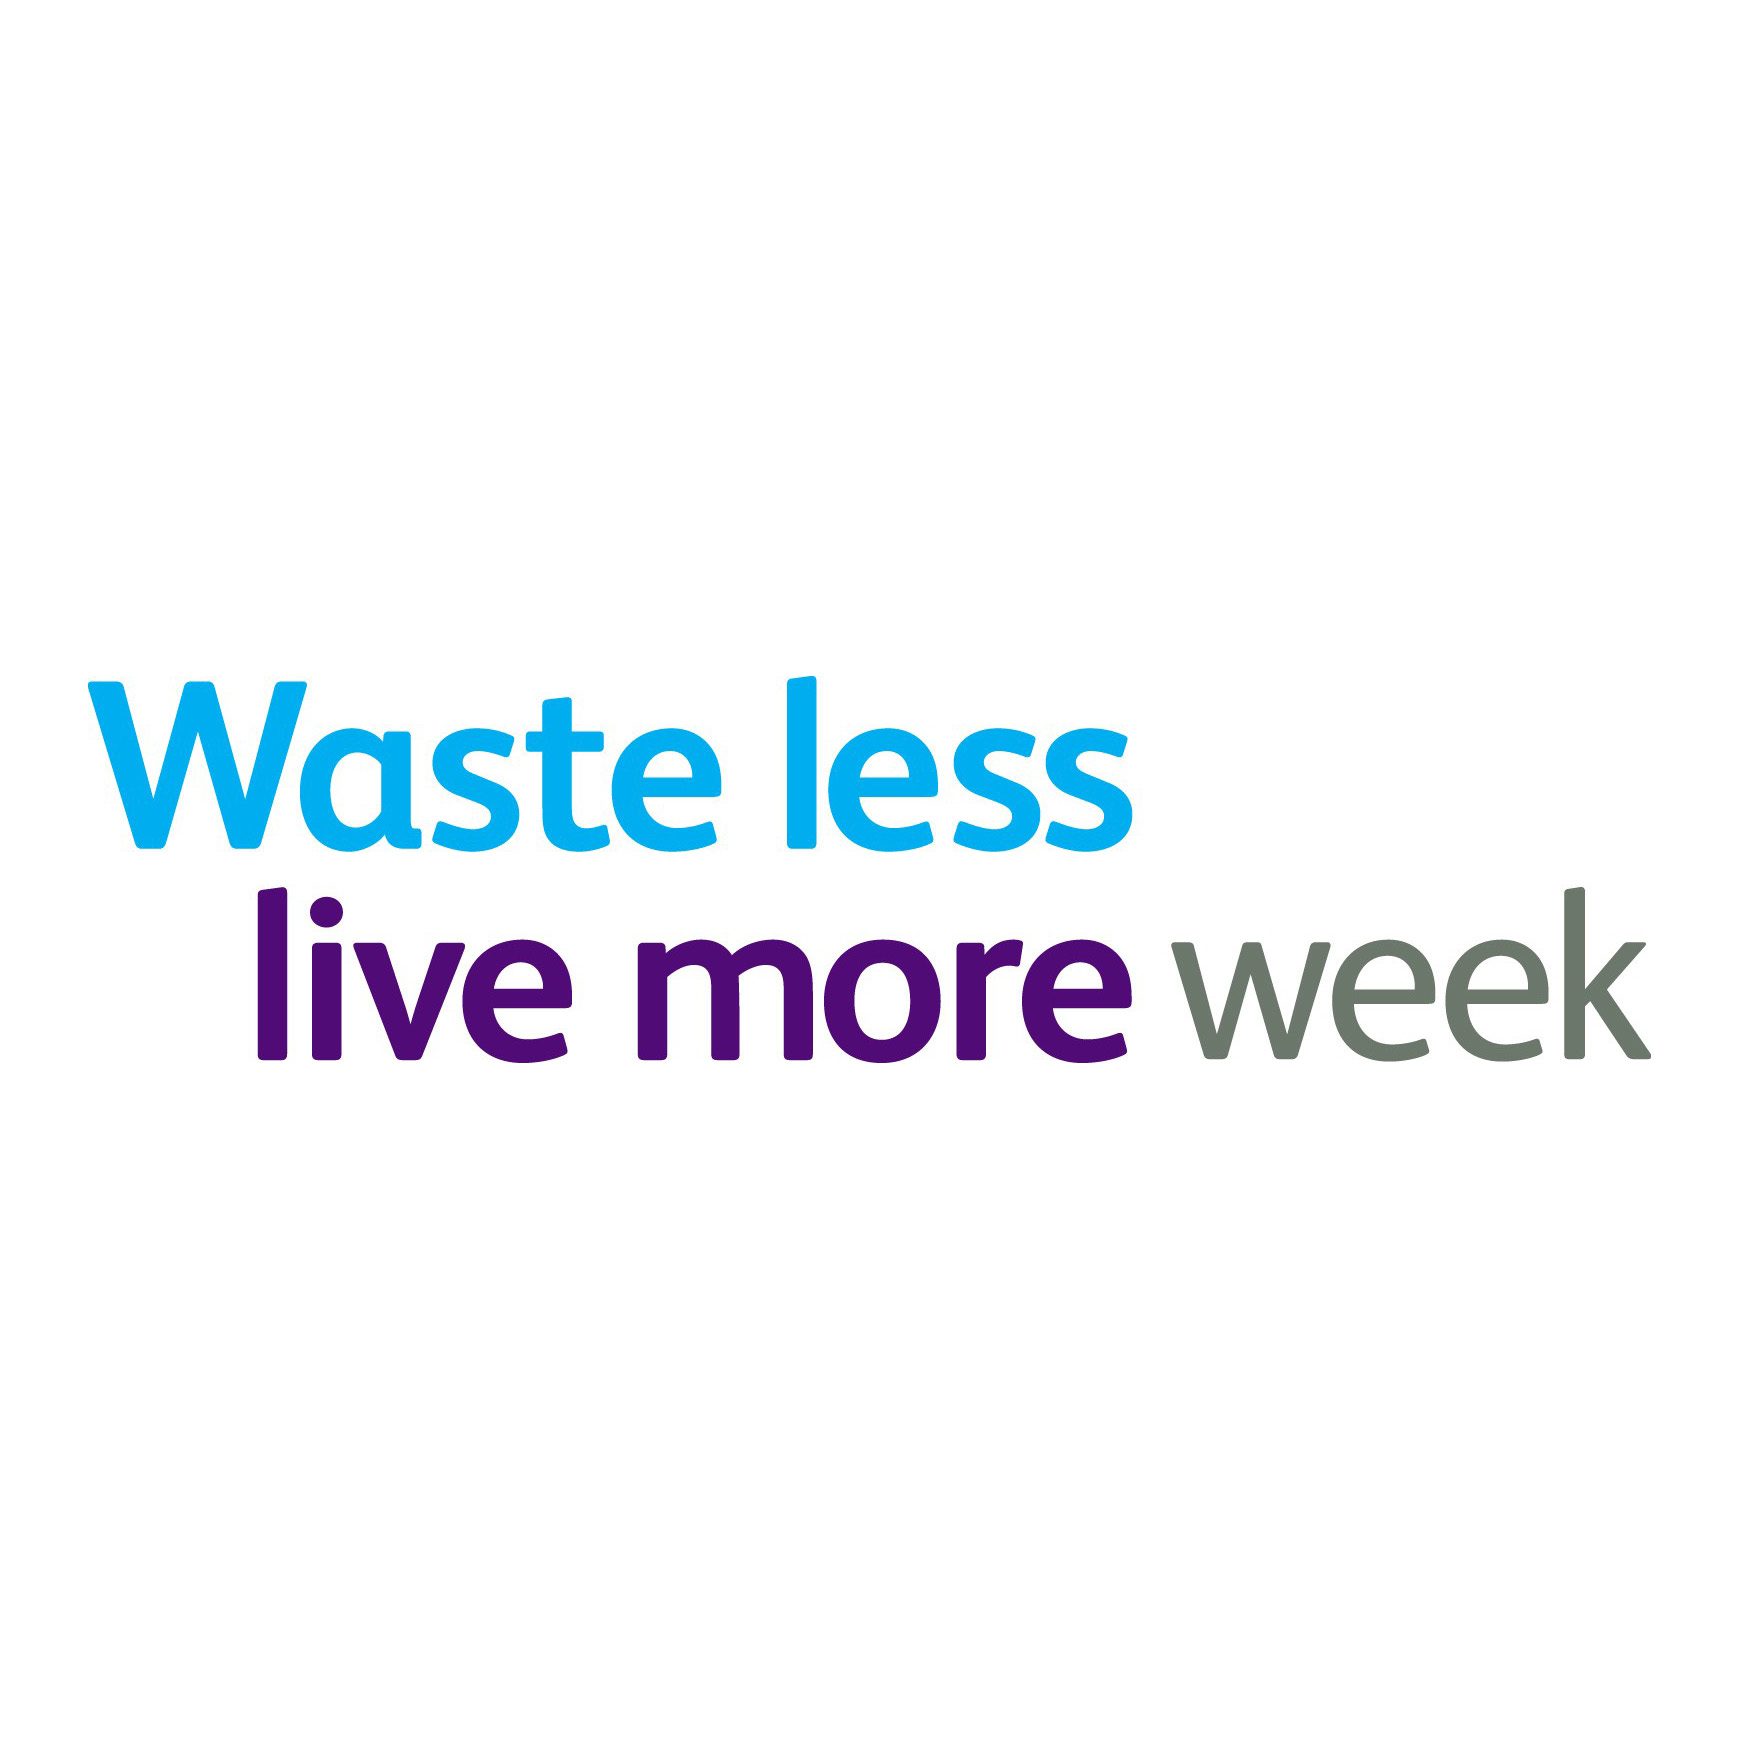 Waste less live more week